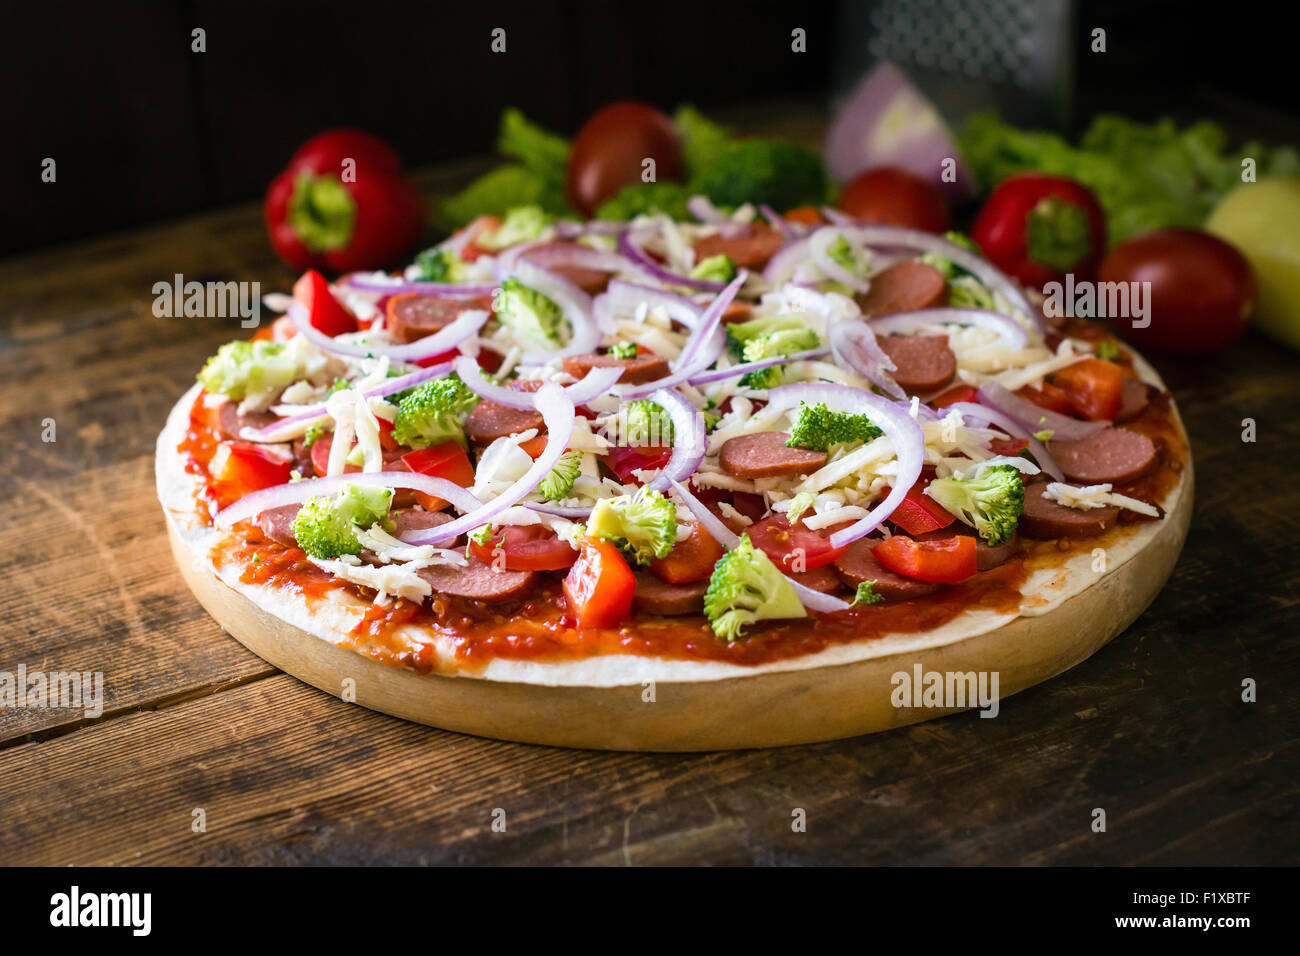 Thin crust pizza with sausages, pepper, tomatoes, broccoli and cheese on round wooden board Stock Photo